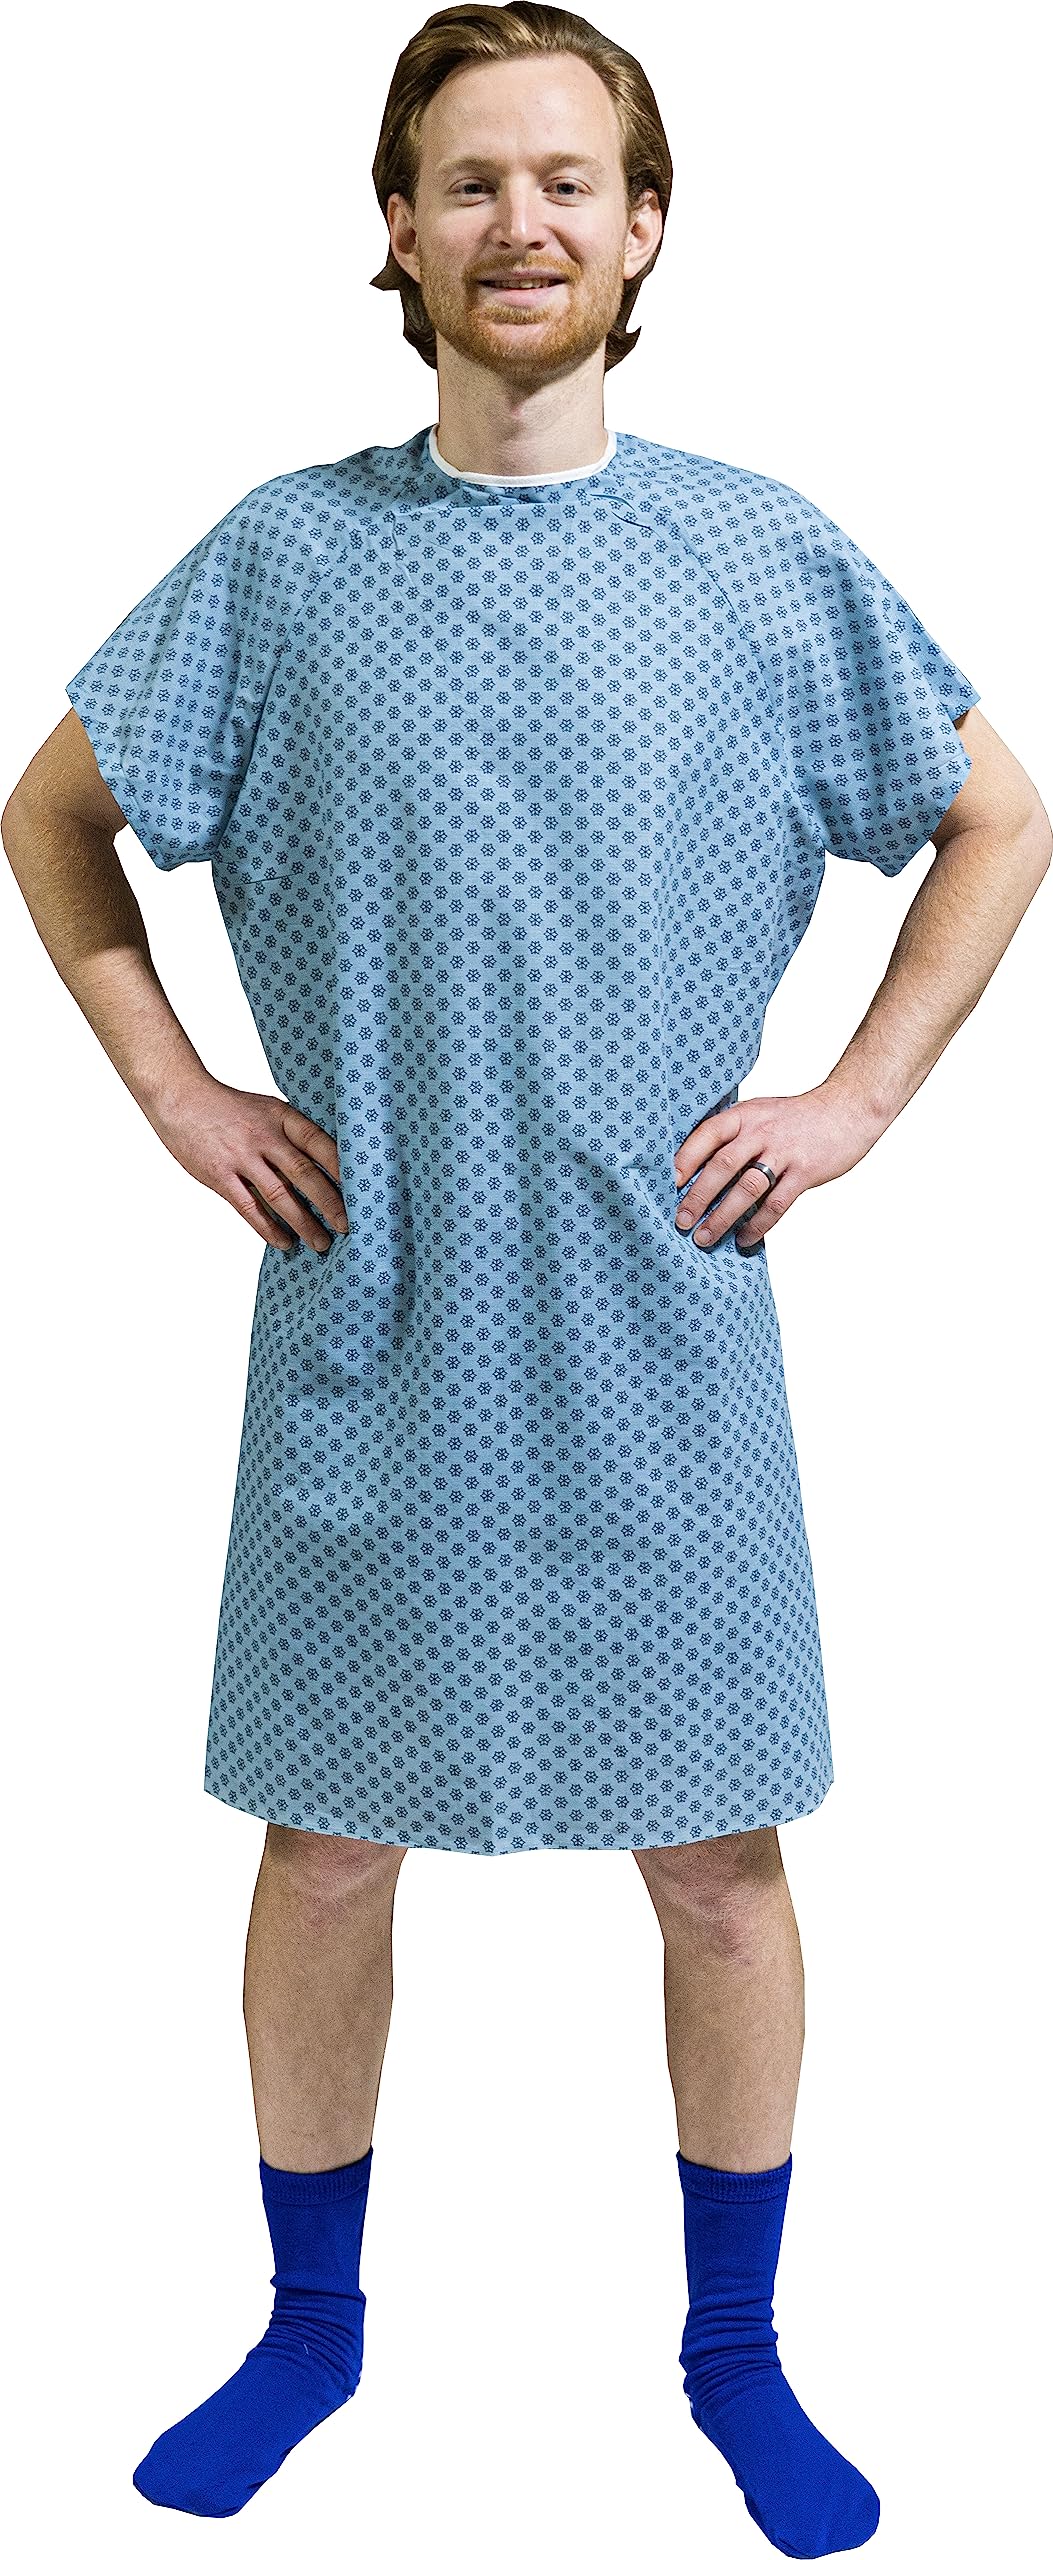 Briggs Healthcare Convalescent Gown with Back Tape Ties Blue 532-8030-0100  - Walmart.com